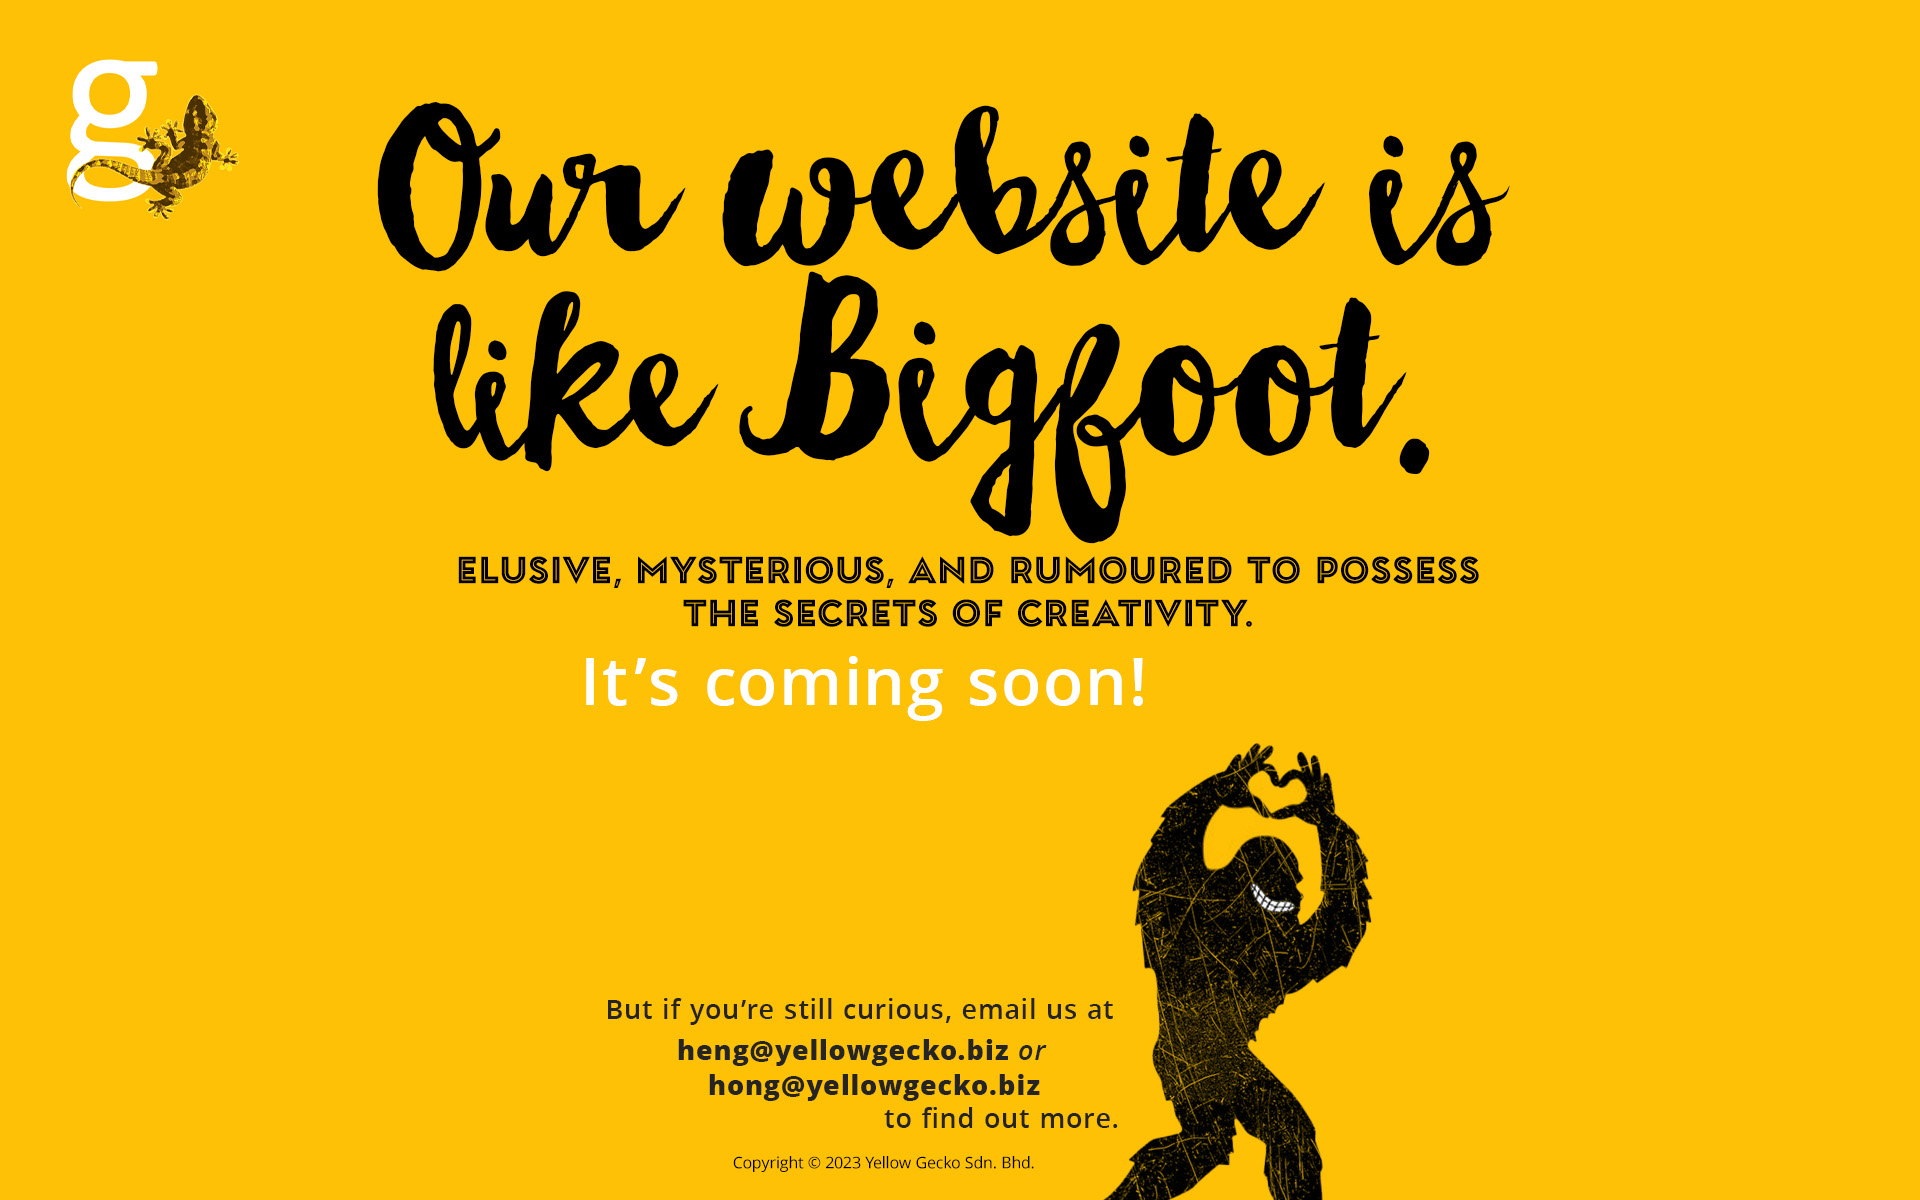 Our website is like Bigfoot. Elusive, mysterious, and rumoured to possess the secrets of creativity. It's coming soon! But if you're still curious, email us at heng@yellowgecko.biz or hong@yellowgecko.biz Copyright © 2023 Yellow Gecko Sdn. Bhd.